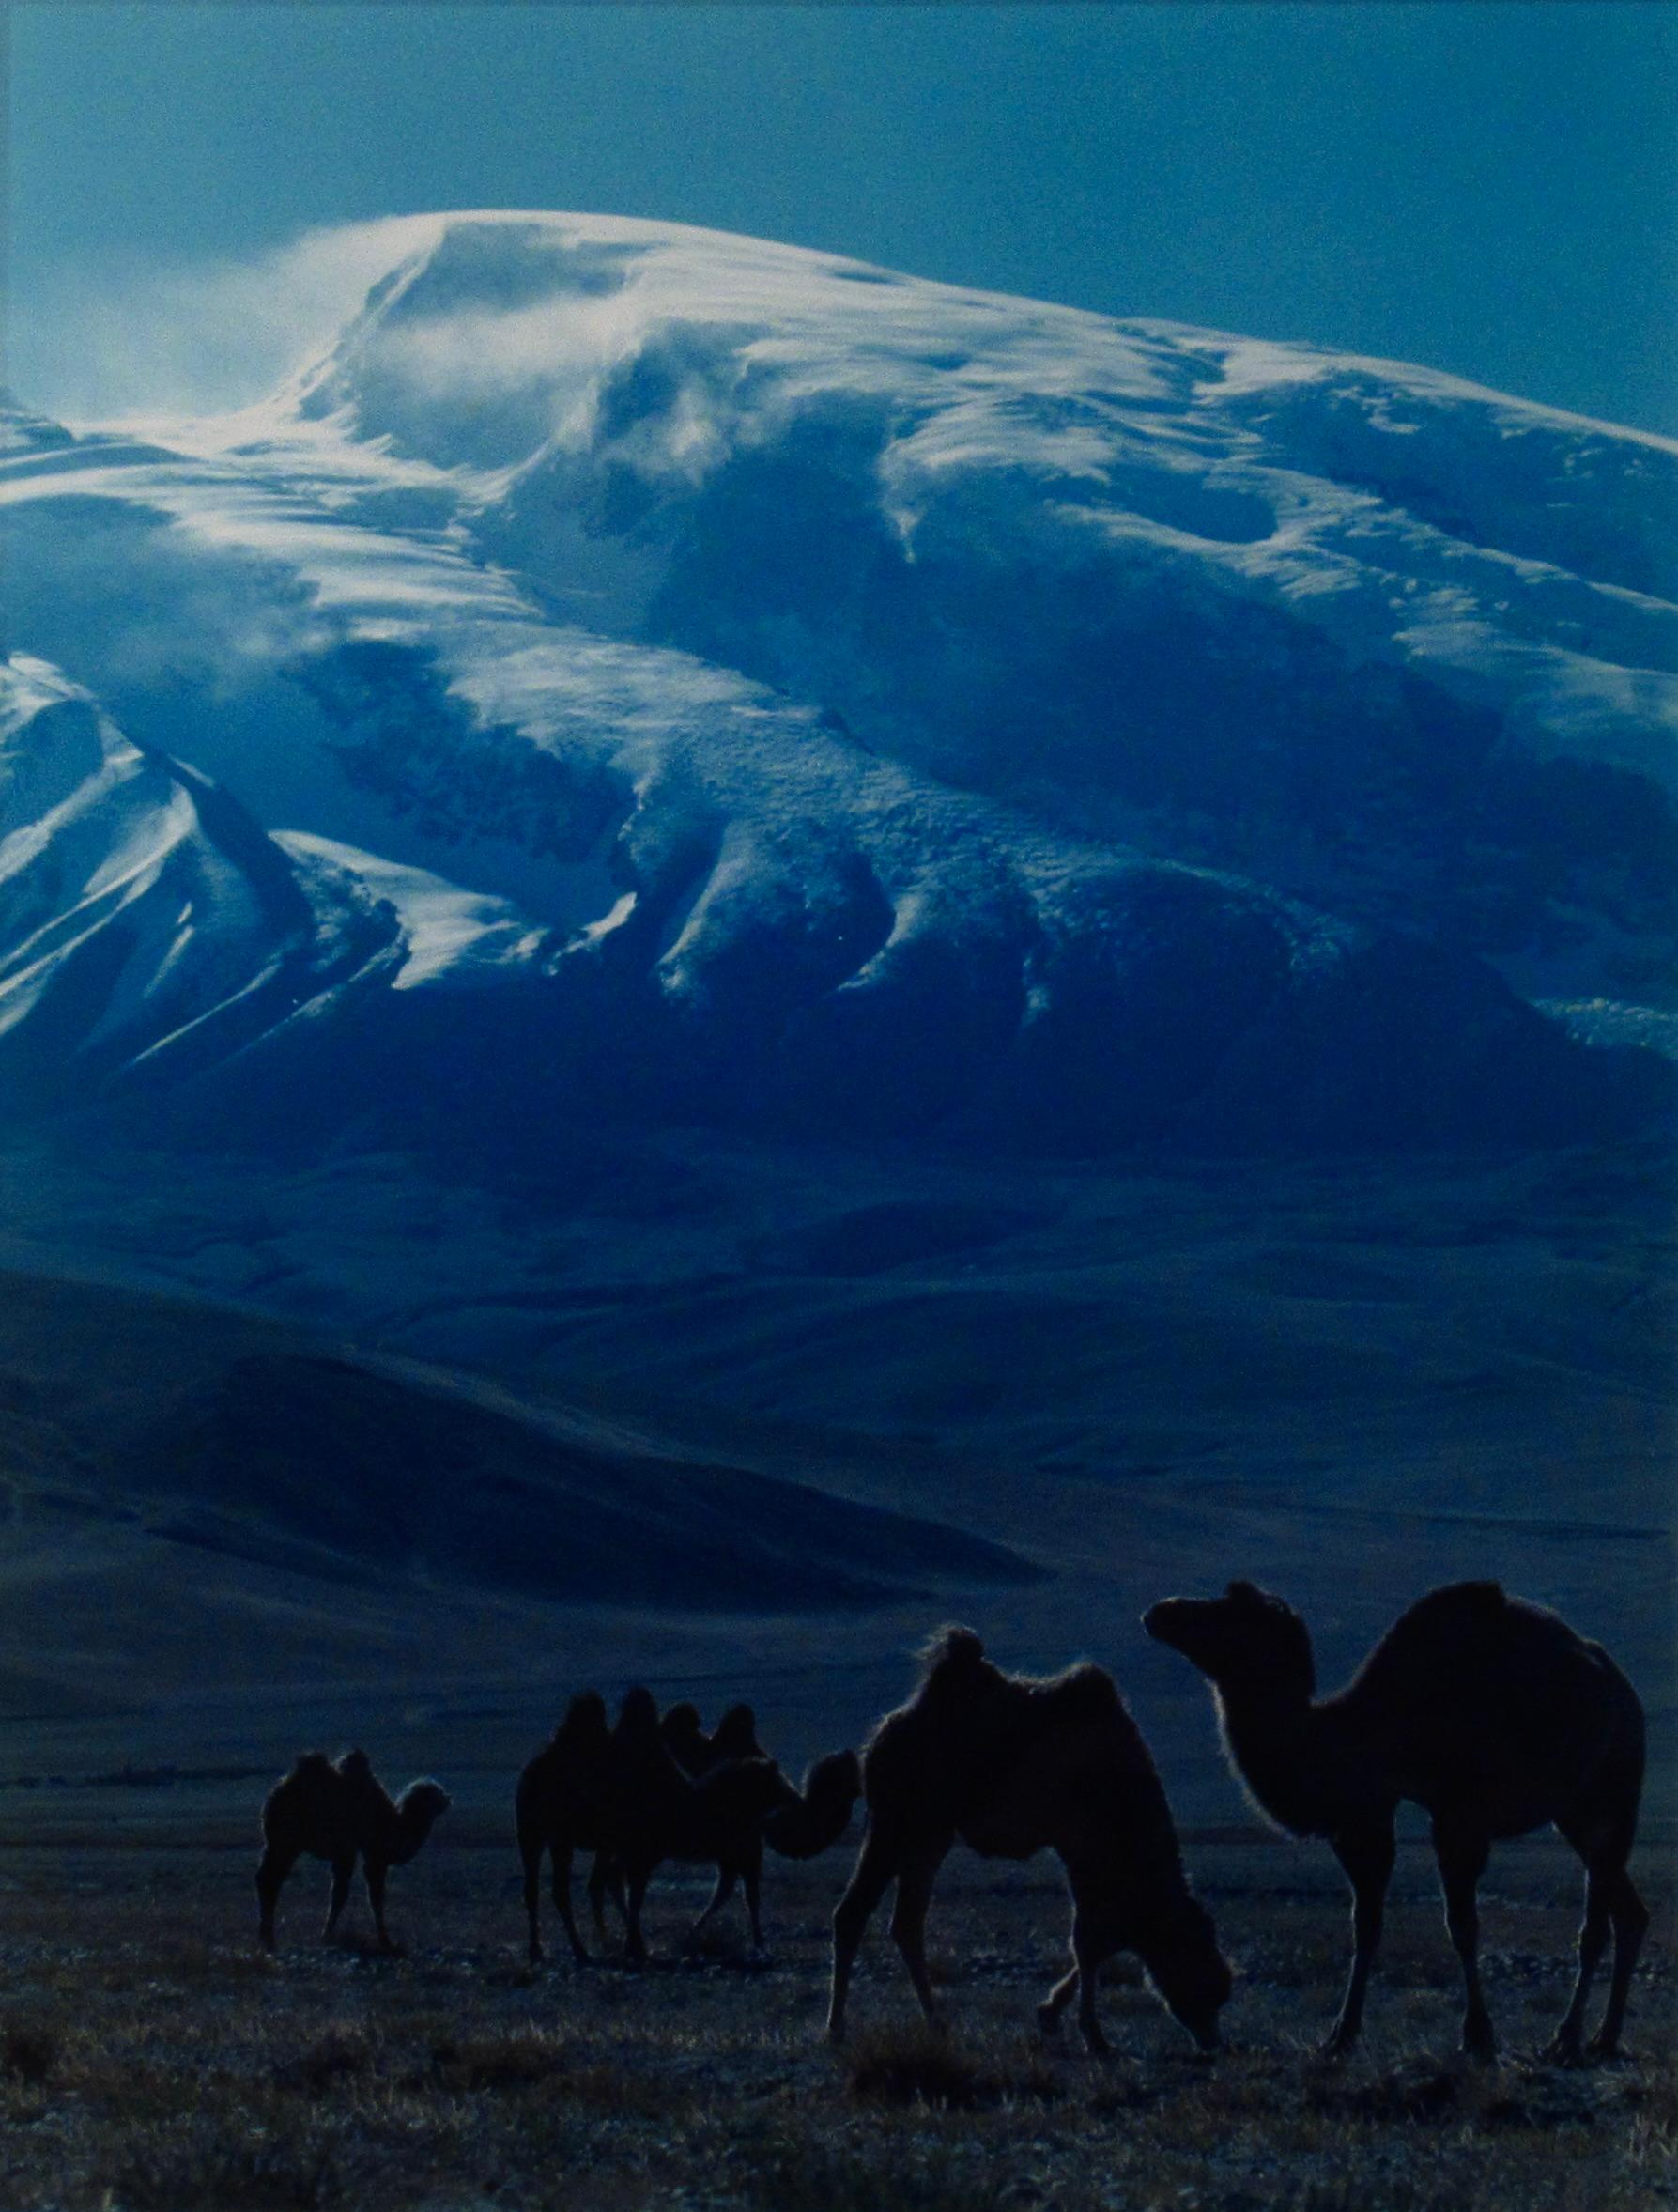 Mt. Mostag (Muztagh) and Wild camels - Photograph by Keith Guo Ji Liang